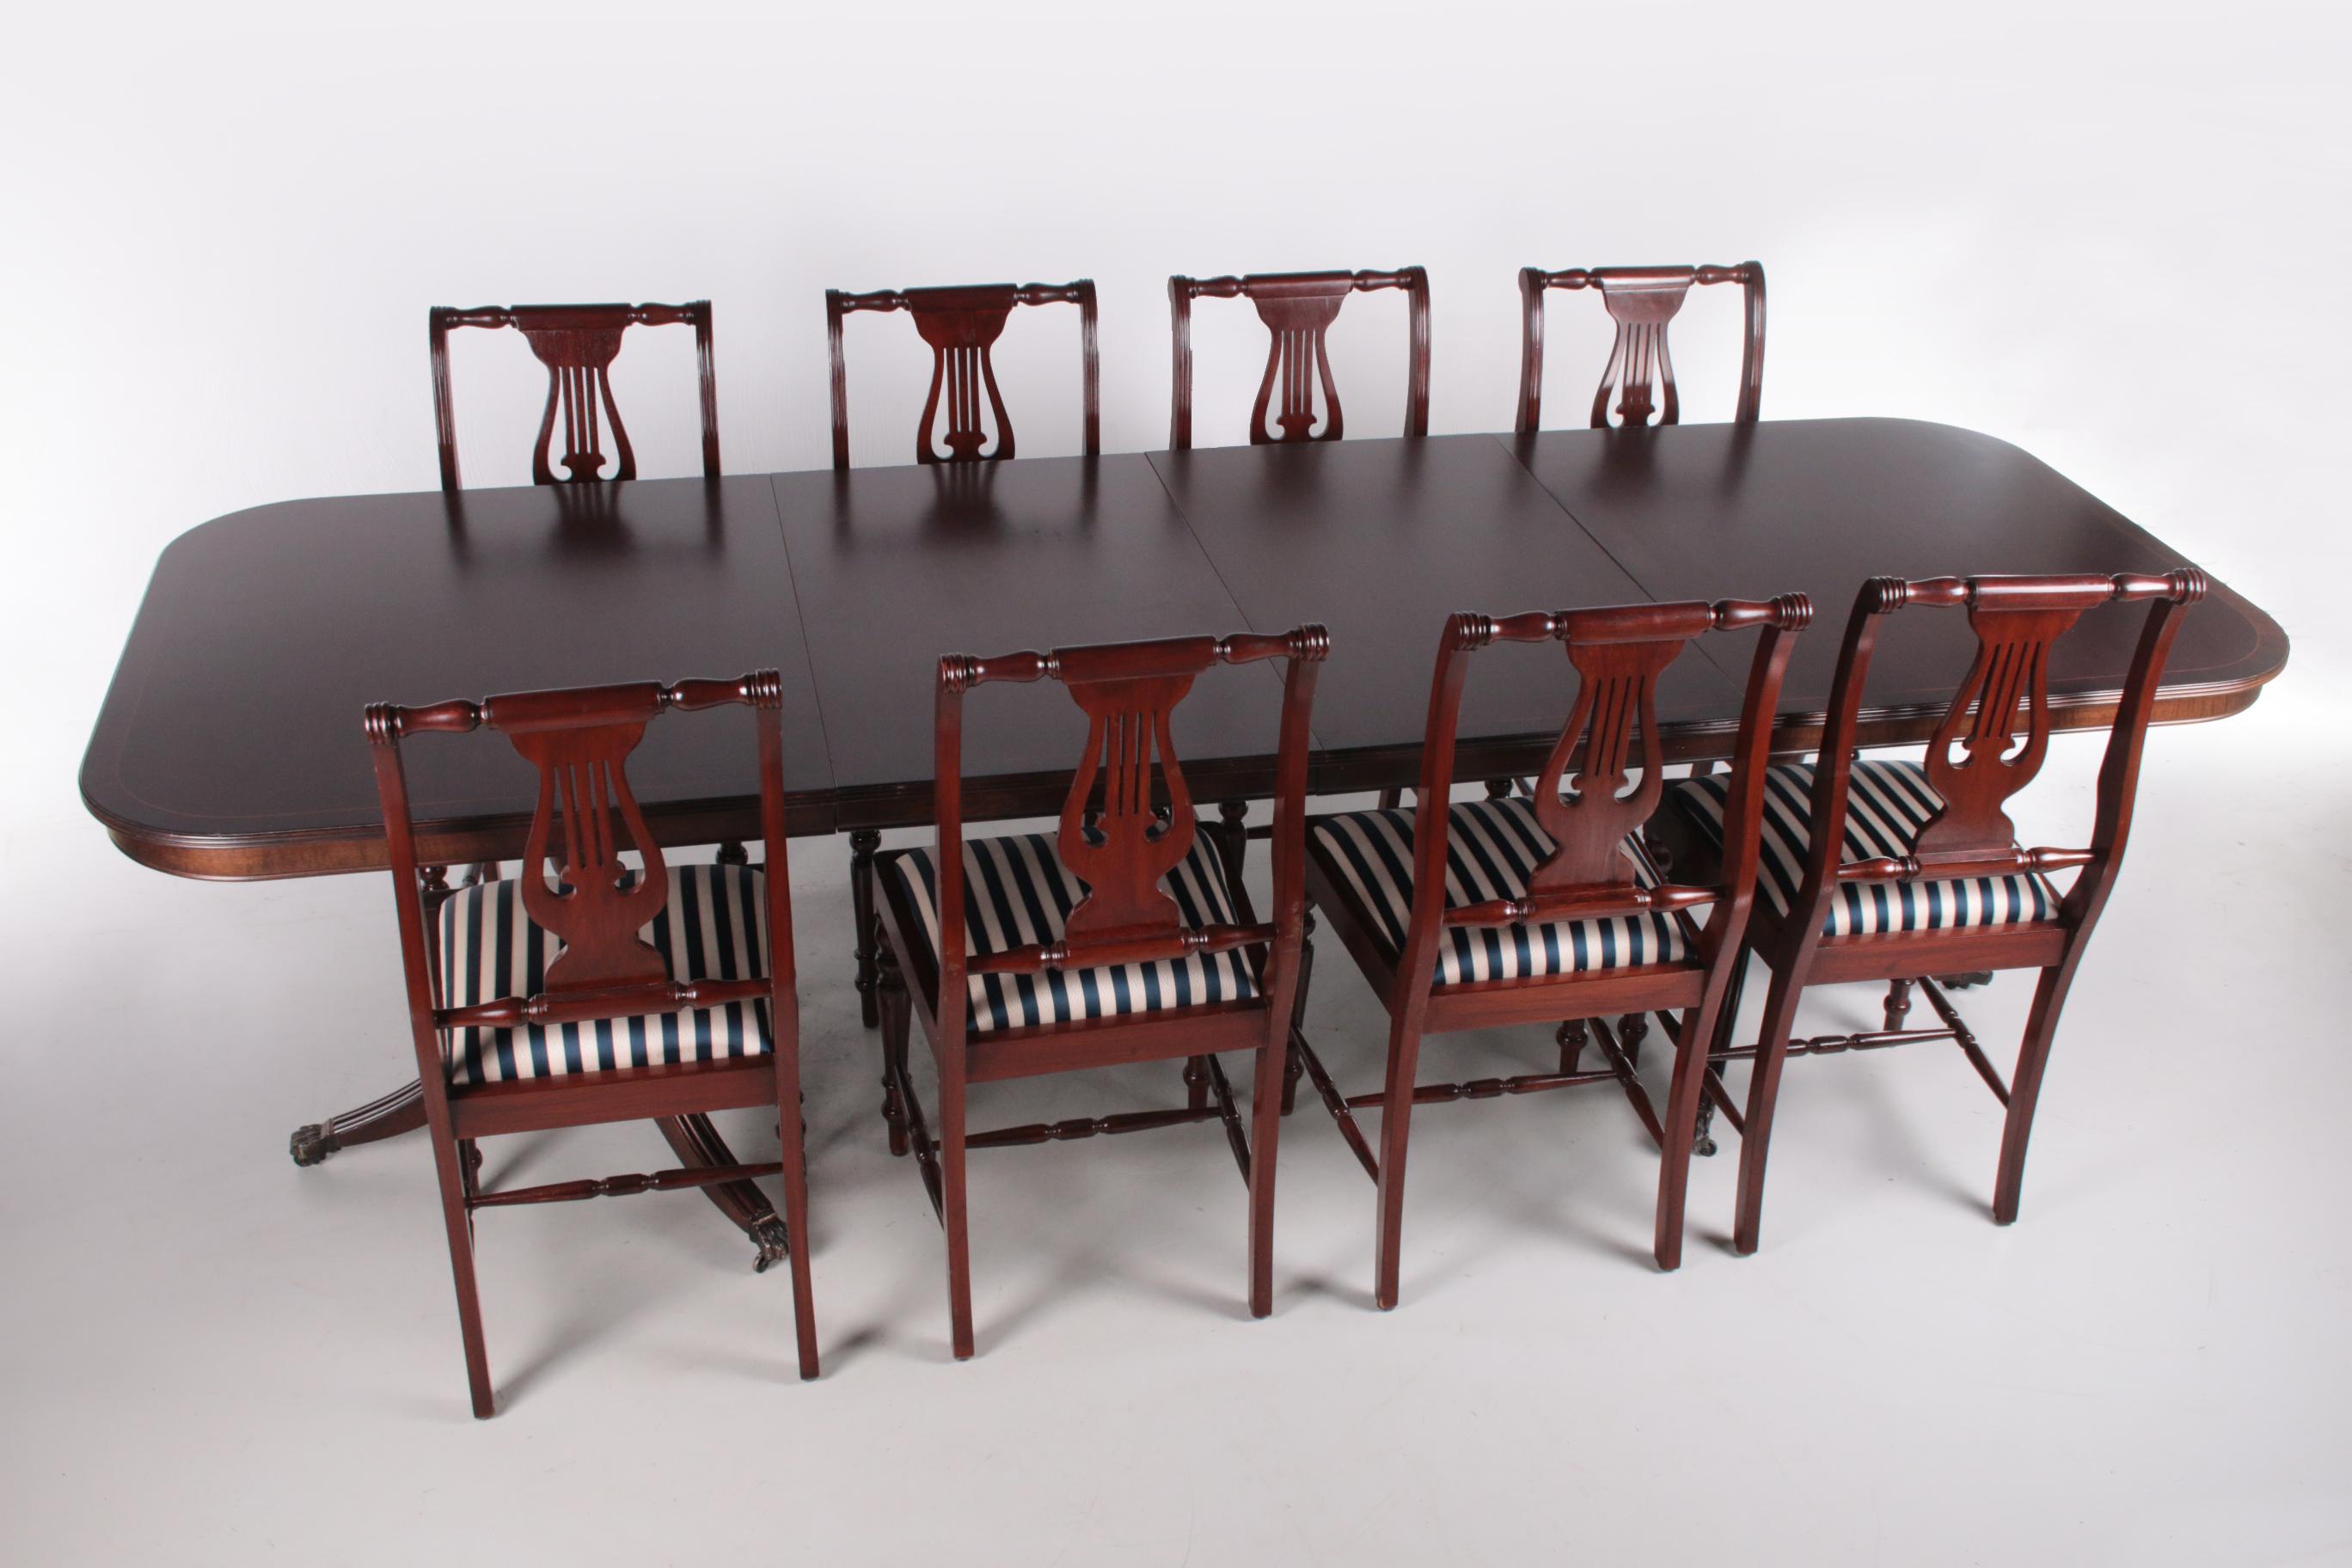 This English mahogany dining room set with eight chairs is designed in the chic Queen Anne style. The dining table was made in the 1980s.

This table includes two inserts to make a table with a length of 270 cm. The eight seats with silk